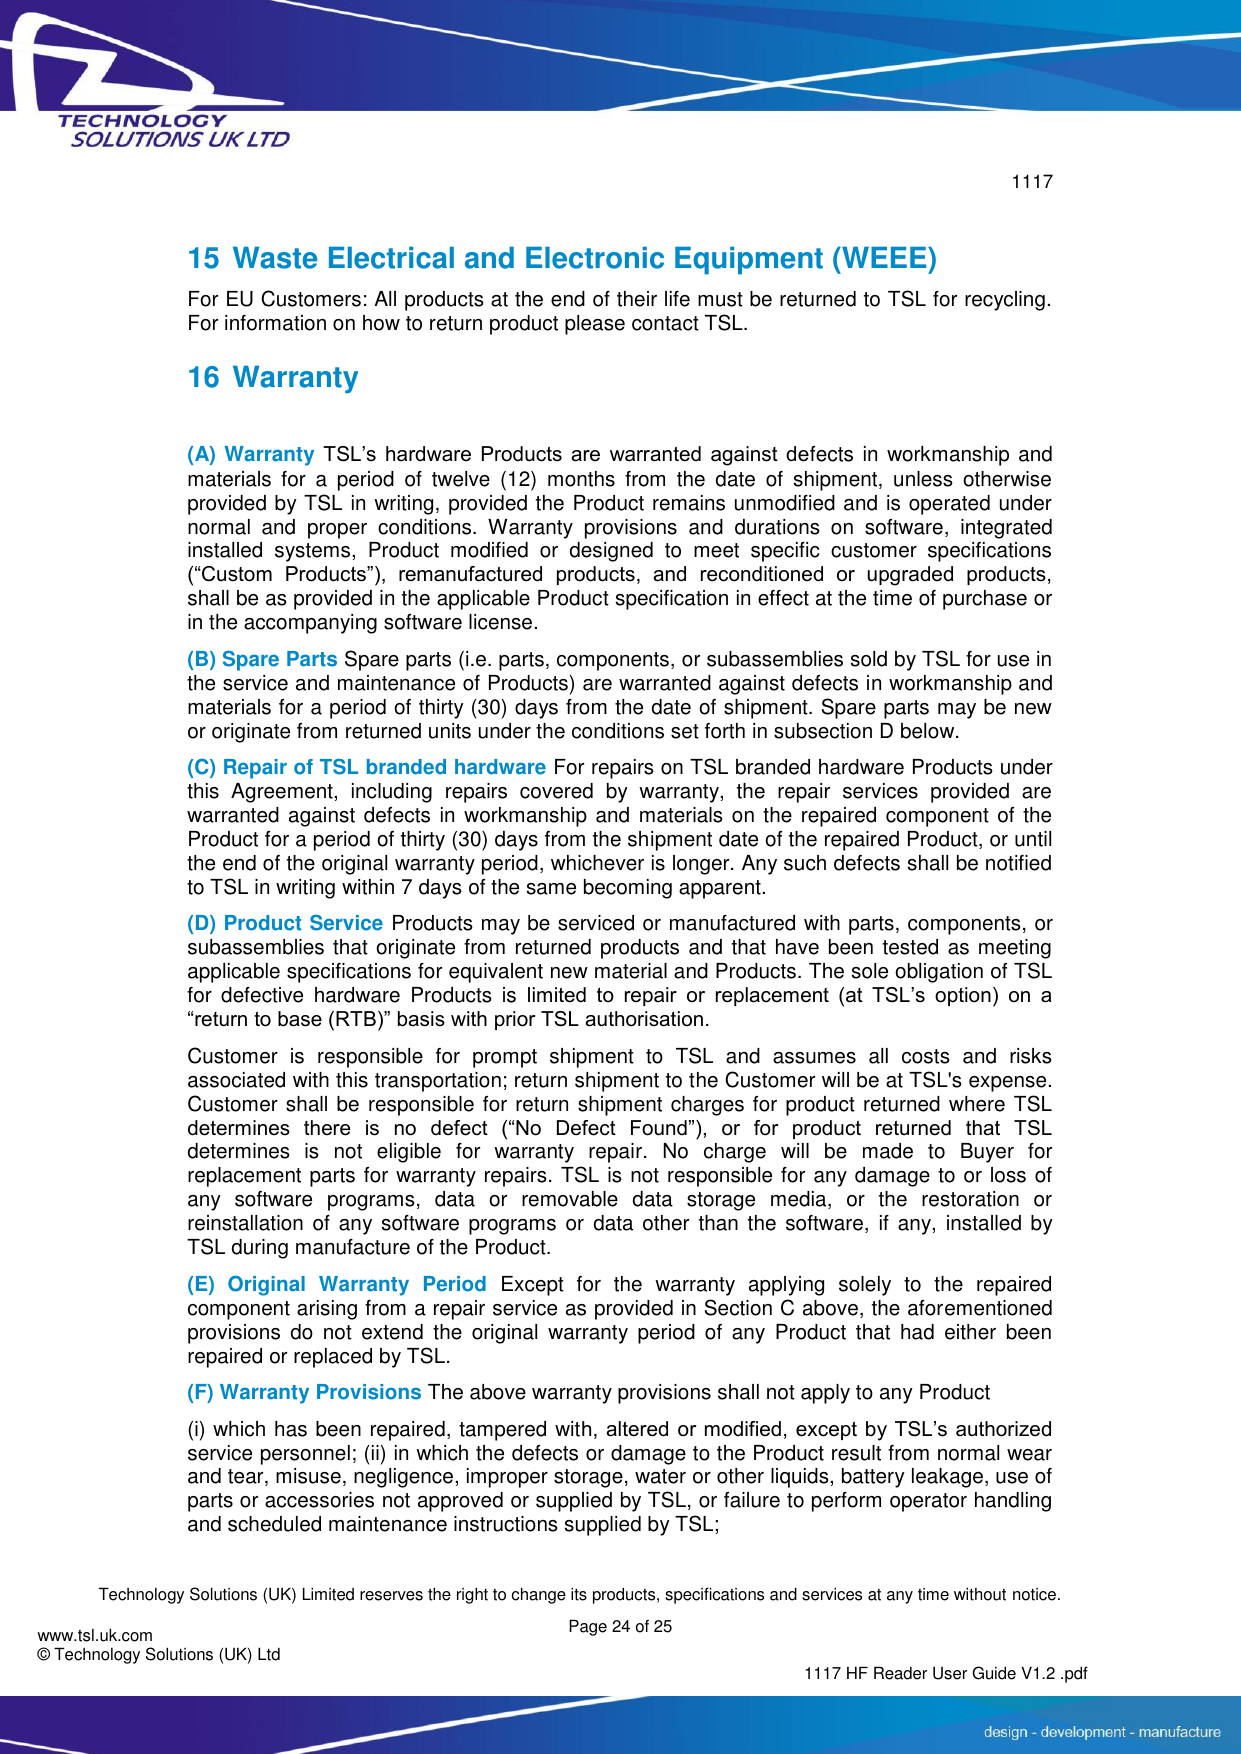        1117  Technology Solutions (UK) Limited reserves the right to change its products, specifications and services at any time without notice. Page 24 of 25 1117 HF Reader User Guide V1.2 .pdf www.tsl.uk.com © Technology Solutions (UK) Ltd   15 Waste Electrical and Electronic Equipment (WEEE) For EU Customers: All products at the end of their life must be returned to TSL for recycling. For information on how to return product please contact TSL. 16 Warranty  (A) Warranty TSL’s  hardware  Products  are  warranted  against  defects in workmanship and materials  for  a  period  of  twelve  (12)  months  from  the  date  of  shipment,  unless  otherwise provided by TSL in writing, provided the Product remains unmodified and is operated under normal  and  proper  conditions.  Warranty  provisions  and  durations  on  software,  integrated installed  systems,  Product  modified  or  designed  to  meet  specific  customer  specifications (“Custom  Products”),  remanufactured  products,  and  reconditioned  or  upgraded  products, shall be as provided in the applicable Product specification in effect at the time of purchase or in the accompanying software license. (B) Spare Parts Spare parts (i.e. parts, components, or subassemblies sold by TSL for use in the service and maintenance of Products) are warranted against defects in workmanship and materials for a period of thirty (30) days from the date of shipment. Spare parts may be new or originate from returned units under the conditions set forth in subsection D below. (C) Repair of TSL branded hardware For repairs on TSL branded hardware Products under this  Agreement,  including  repairs  covered  by  warranty,  the  repair  services  provided  are warranted against defects in workmanship and materials on the repaired component of the Product for a period of thirty (30) days from the shipment date of the repaired Product, or until the end of the original warranty period, whichever is longer. Any such defects shall be notified to TSL in writing within 7 days of the same becoming apparent. (D) Product Service Products may be serviced or manufactured with parts, components, or subassemblies that originate from returned products and that have been tested as meeting applicable specifications for equivalent new material and Products. The sole obligation of TSL for  defective  hardware  Products  is  limited  to  repair  or  replacement  (at  TSL’s  option)  on  a “return to base (RTB)” basis with prior TSL authorisation. Customer  is  responsible  for  prompt  shipment  to  TSL  and  assumes  all  costs  and  risks associated with this transportation; return shipment to the Customer will be at TSL&apos;s expense. Customer shall be responsible for return shipment charges for product returned where TSL determines  there  is  no  defect  (“No  Defect  Found”),  or  for  product  returned  that  TSL determines  is  not  eligible  for  warranty  repair.  No  charge  will  be  made  to  Buyer  for replacement parts for warranty repairs. TSL is not responsible for any damage to or loss of any  software  programs,  data  or  removable  data  storage  media,  or  the  restoration  or reinstallation of  any software  programs or data other  than the  software, if  any, installed by TSL during manufacture of the Product. (E)  Original  Warranty  Period  Except  for  the  warranty  applying  solely  to  the  repaired component arising from a repair service as provided in Section C above, the aforementioned provisions  do  not  extend  the  original  warranty  period  of  any  Product  that  had  either  been repaired or replaced by TSL. (F) Warranty Provisions The above warranty provisions shall not apply to any Product (i) which has been repaired, tampered with, altered  or modified, except by TSL’s authorized service personnel; (ii) in which the defects or damage to the Product result from normal wear and tear, misuse, negligence, improper storage, water or other liquids, battery leakage, use of parts or accessories not approved or supplied by TSL, or failure to perform operator handling and scheduled maintenance instructions supplied by TSL; 